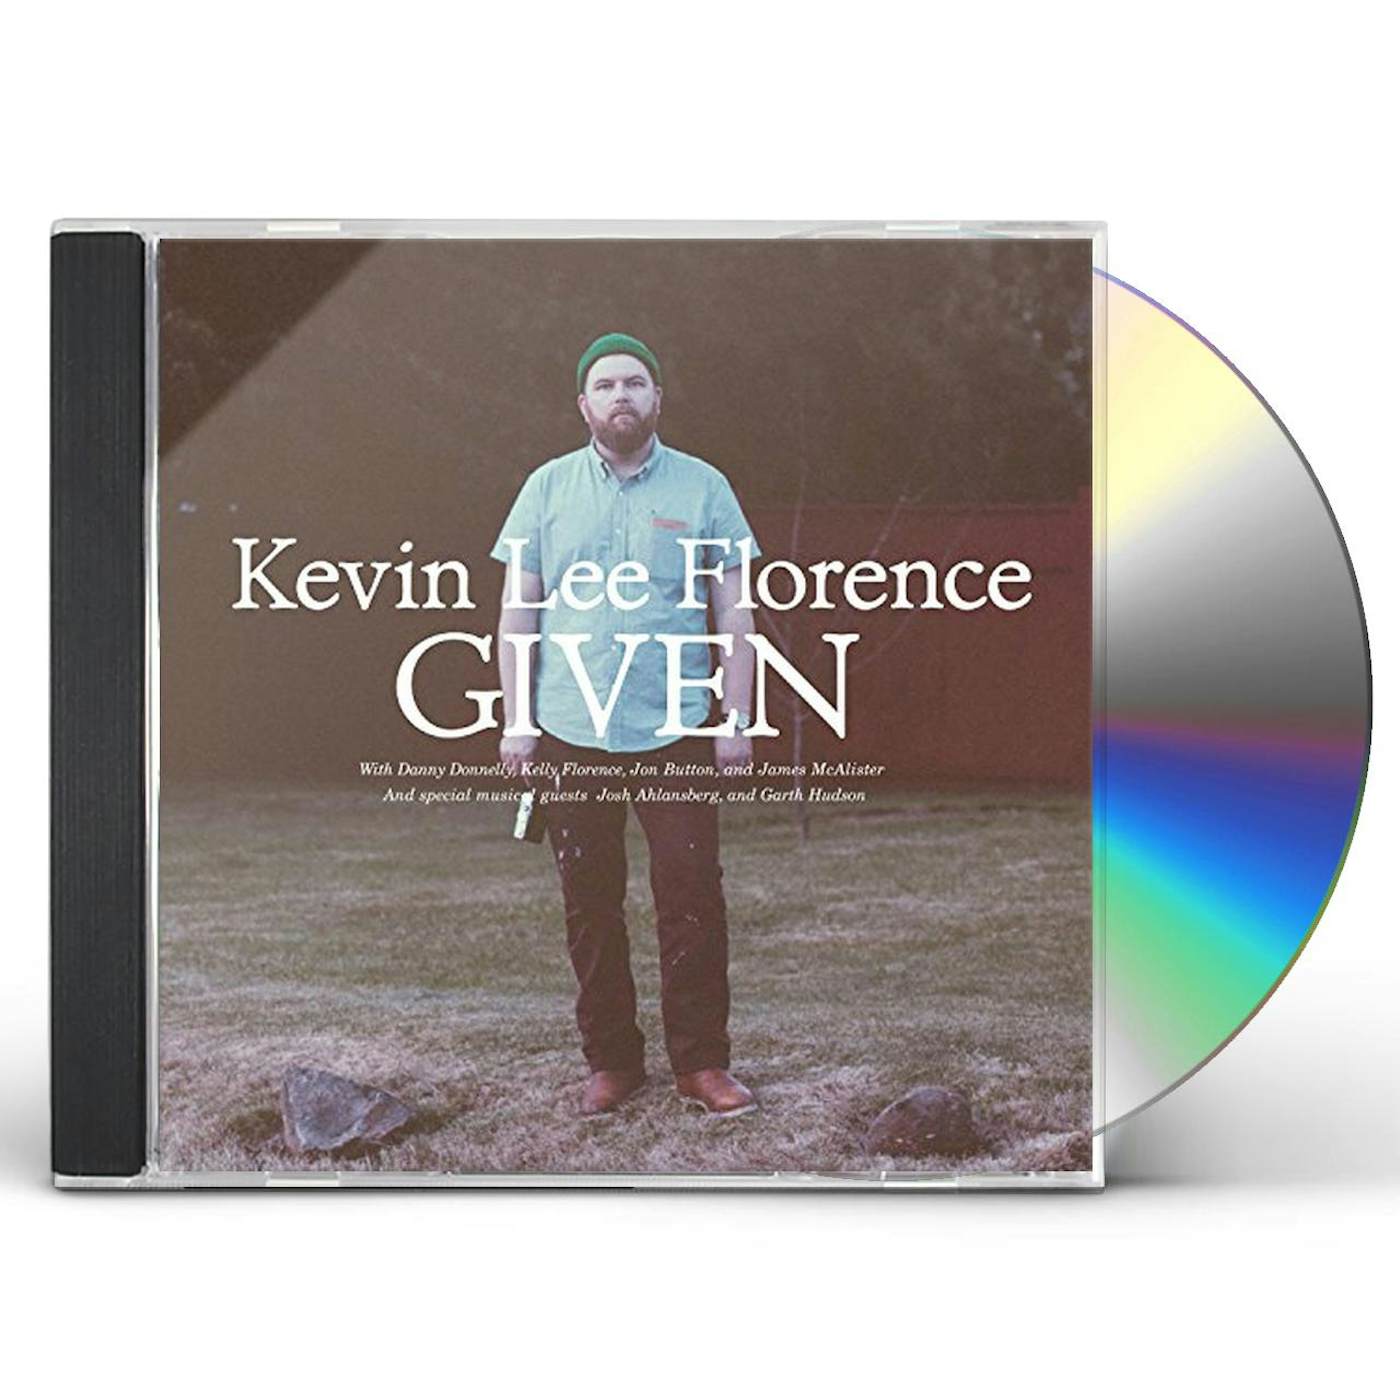 Kevin Lee Florence GIVEN CD